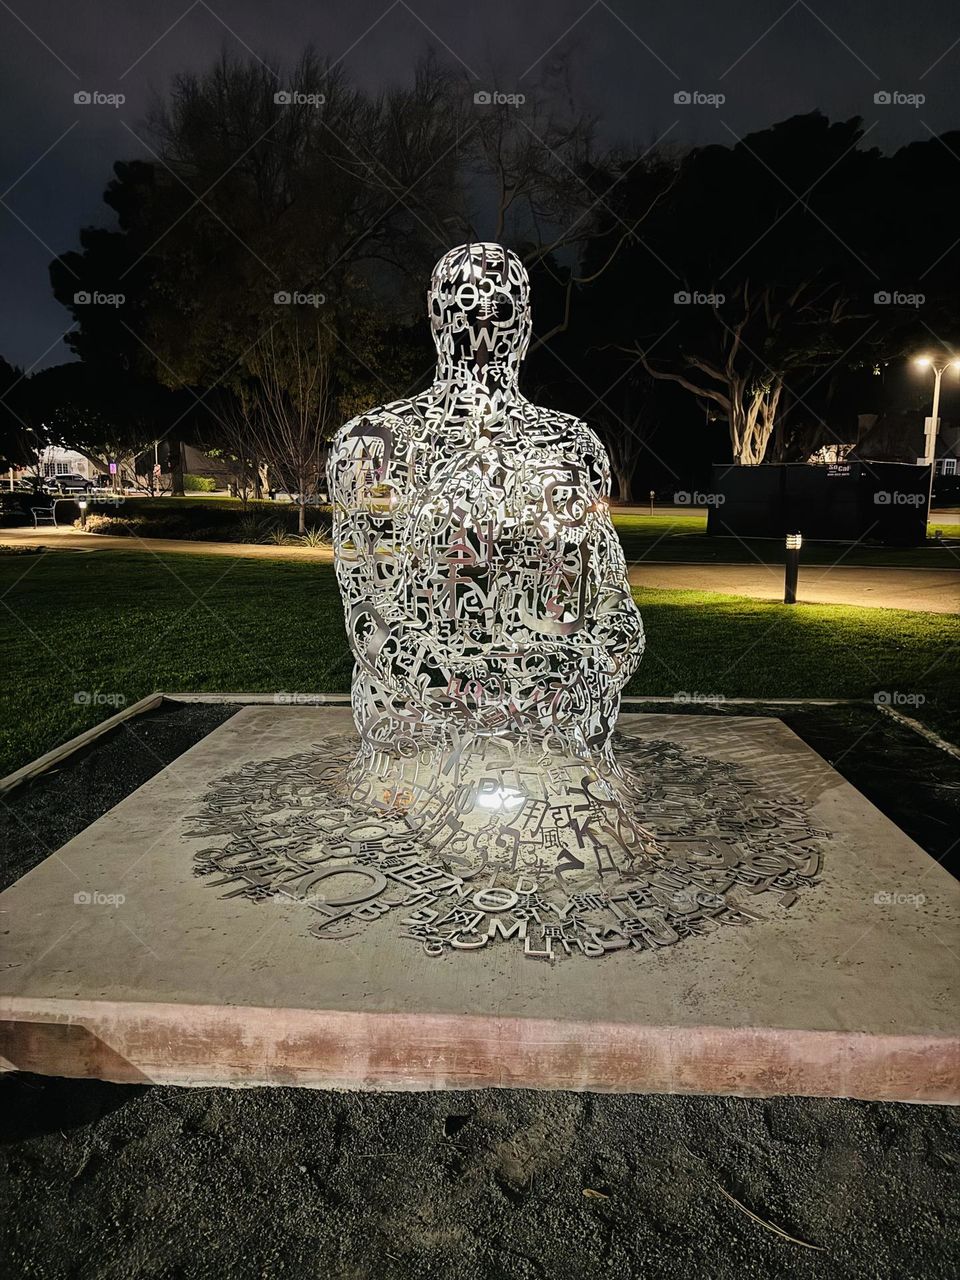 Art Statue, Aluminum Letters made into a man sitting 